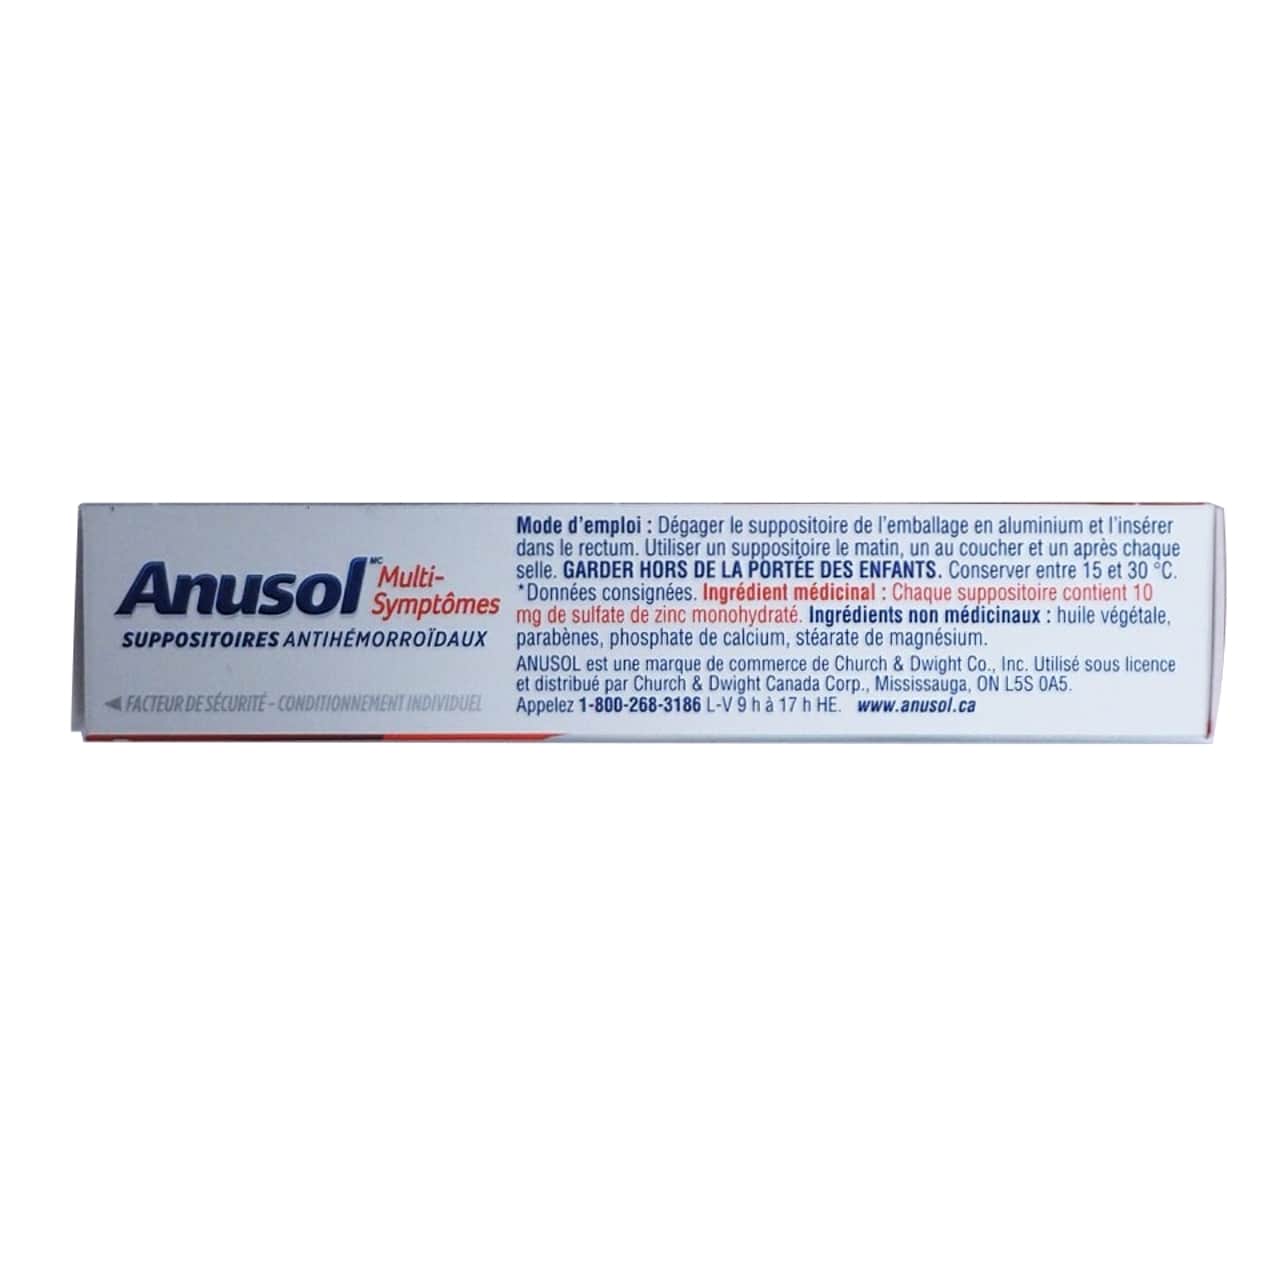 Product details, directions, ingredients, and warnings for Anusol Multi-Symptom Hemorrhoidal Suppositories in Fresh